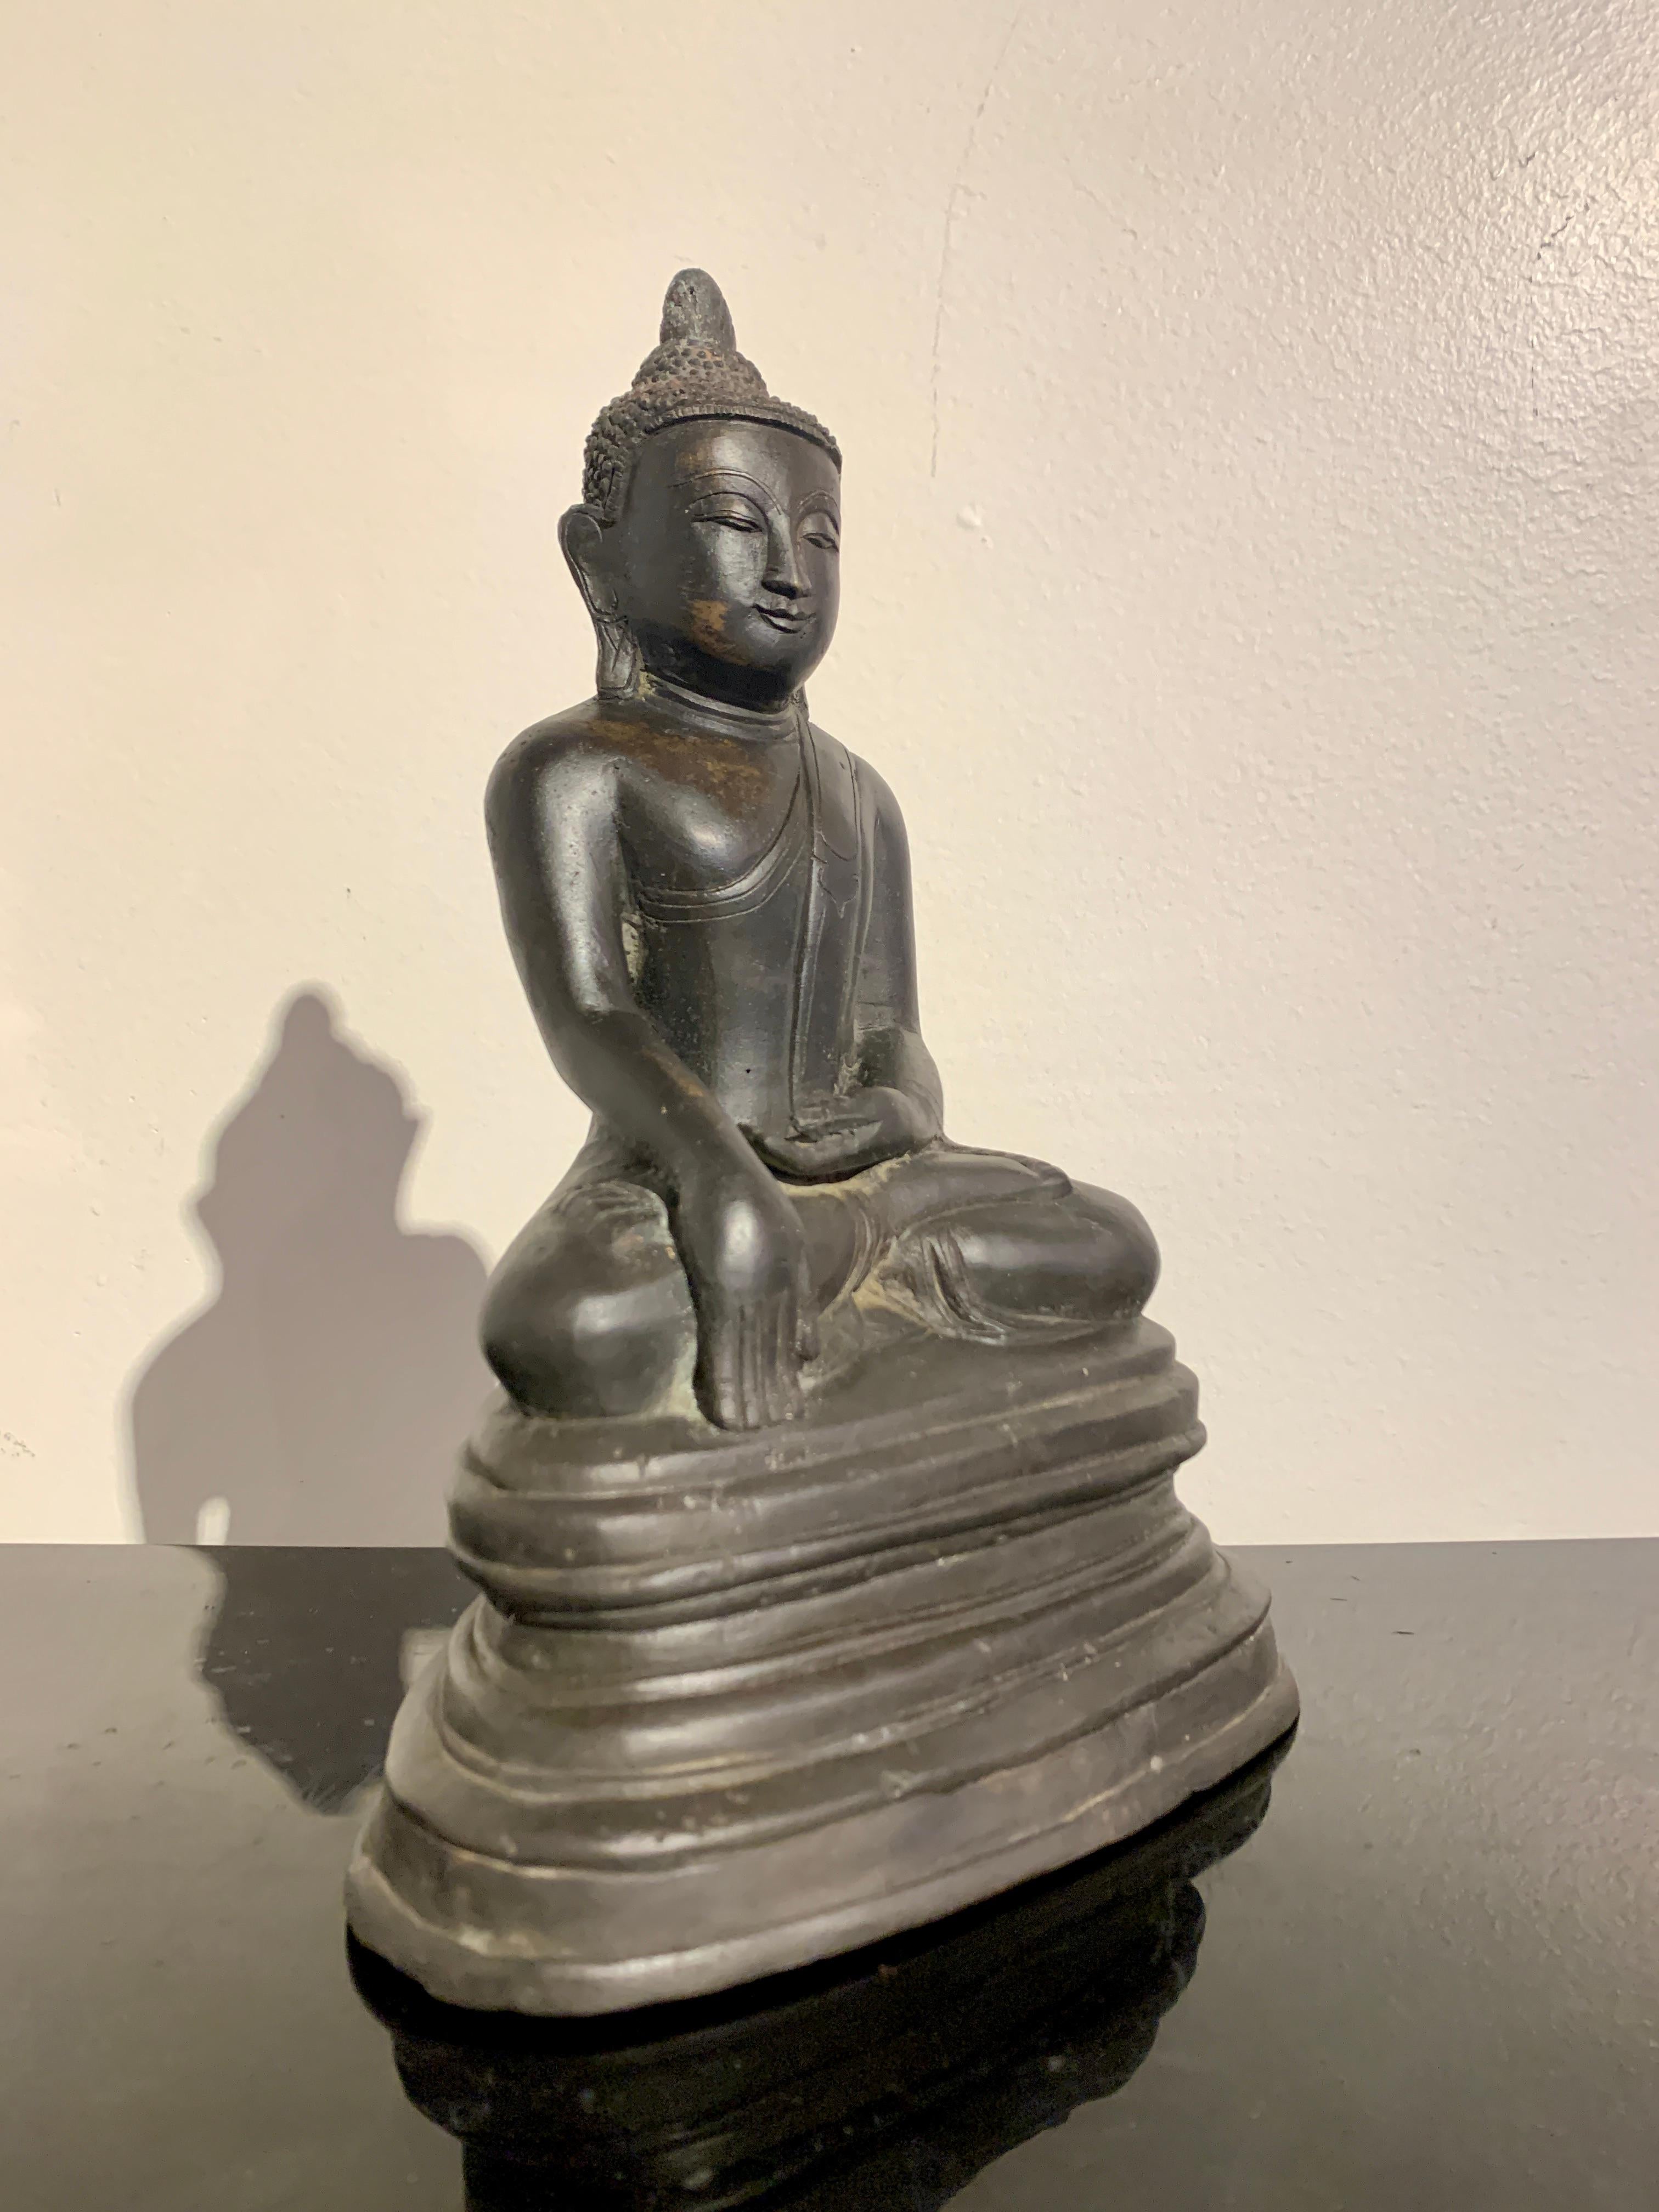 A delightful Burmese cast bronze Buddha in the Arakan style, mid 20th century, Myanmar (Burma).

The Buddha sits in the full lotus position, the soles of his feet turned up. His hands perform bhumisparsha mudra, the gesture of calling the earth to